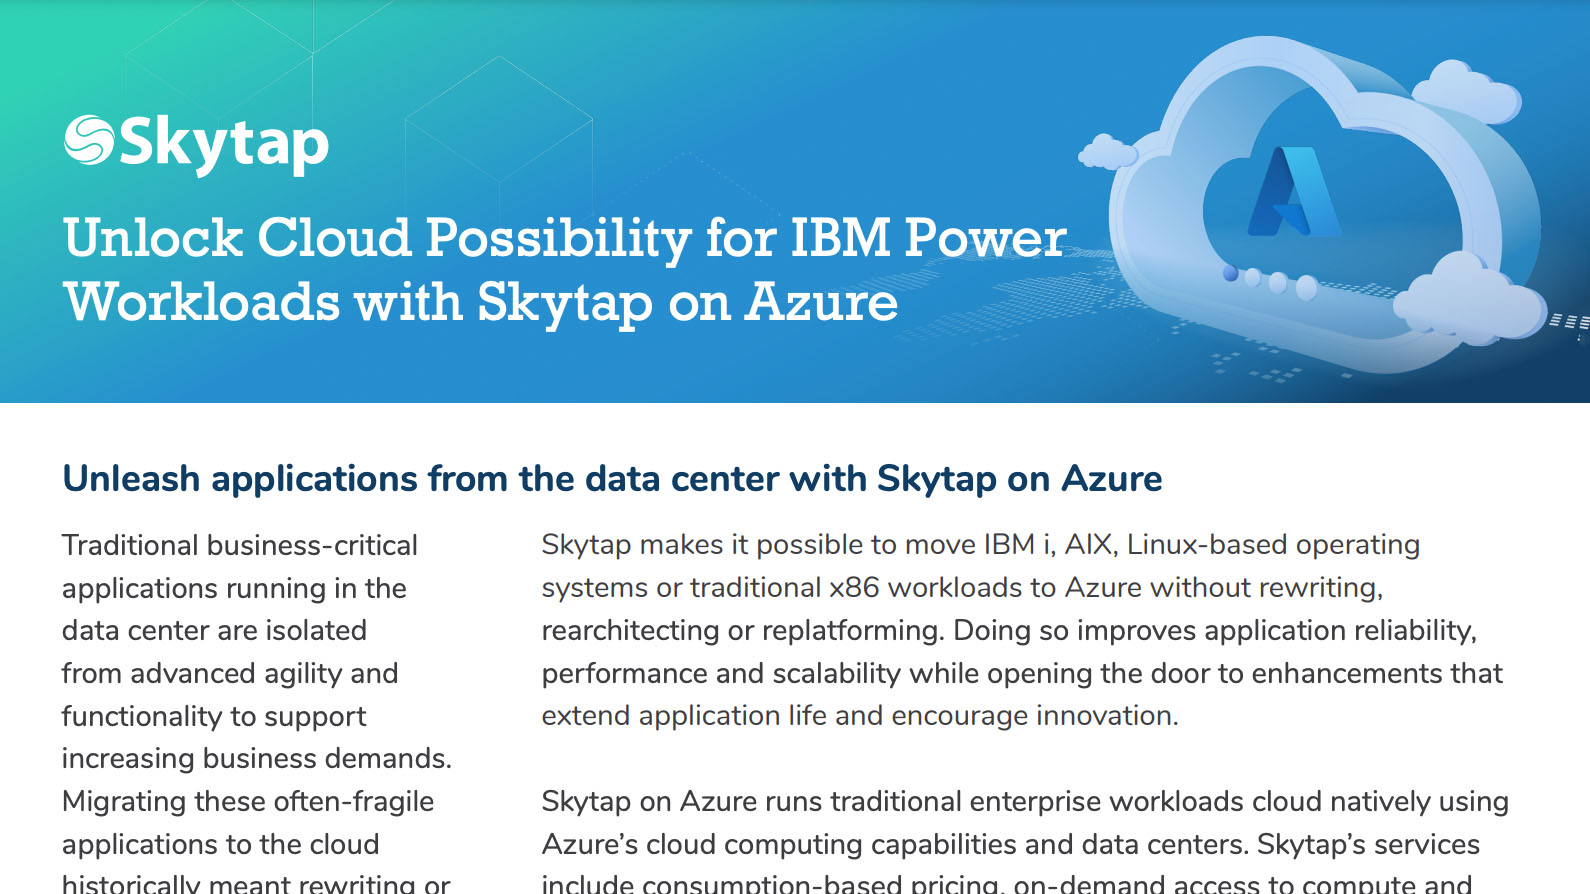 Unlock cloud possibilities for IBM Power workloads with Skytap on Azure